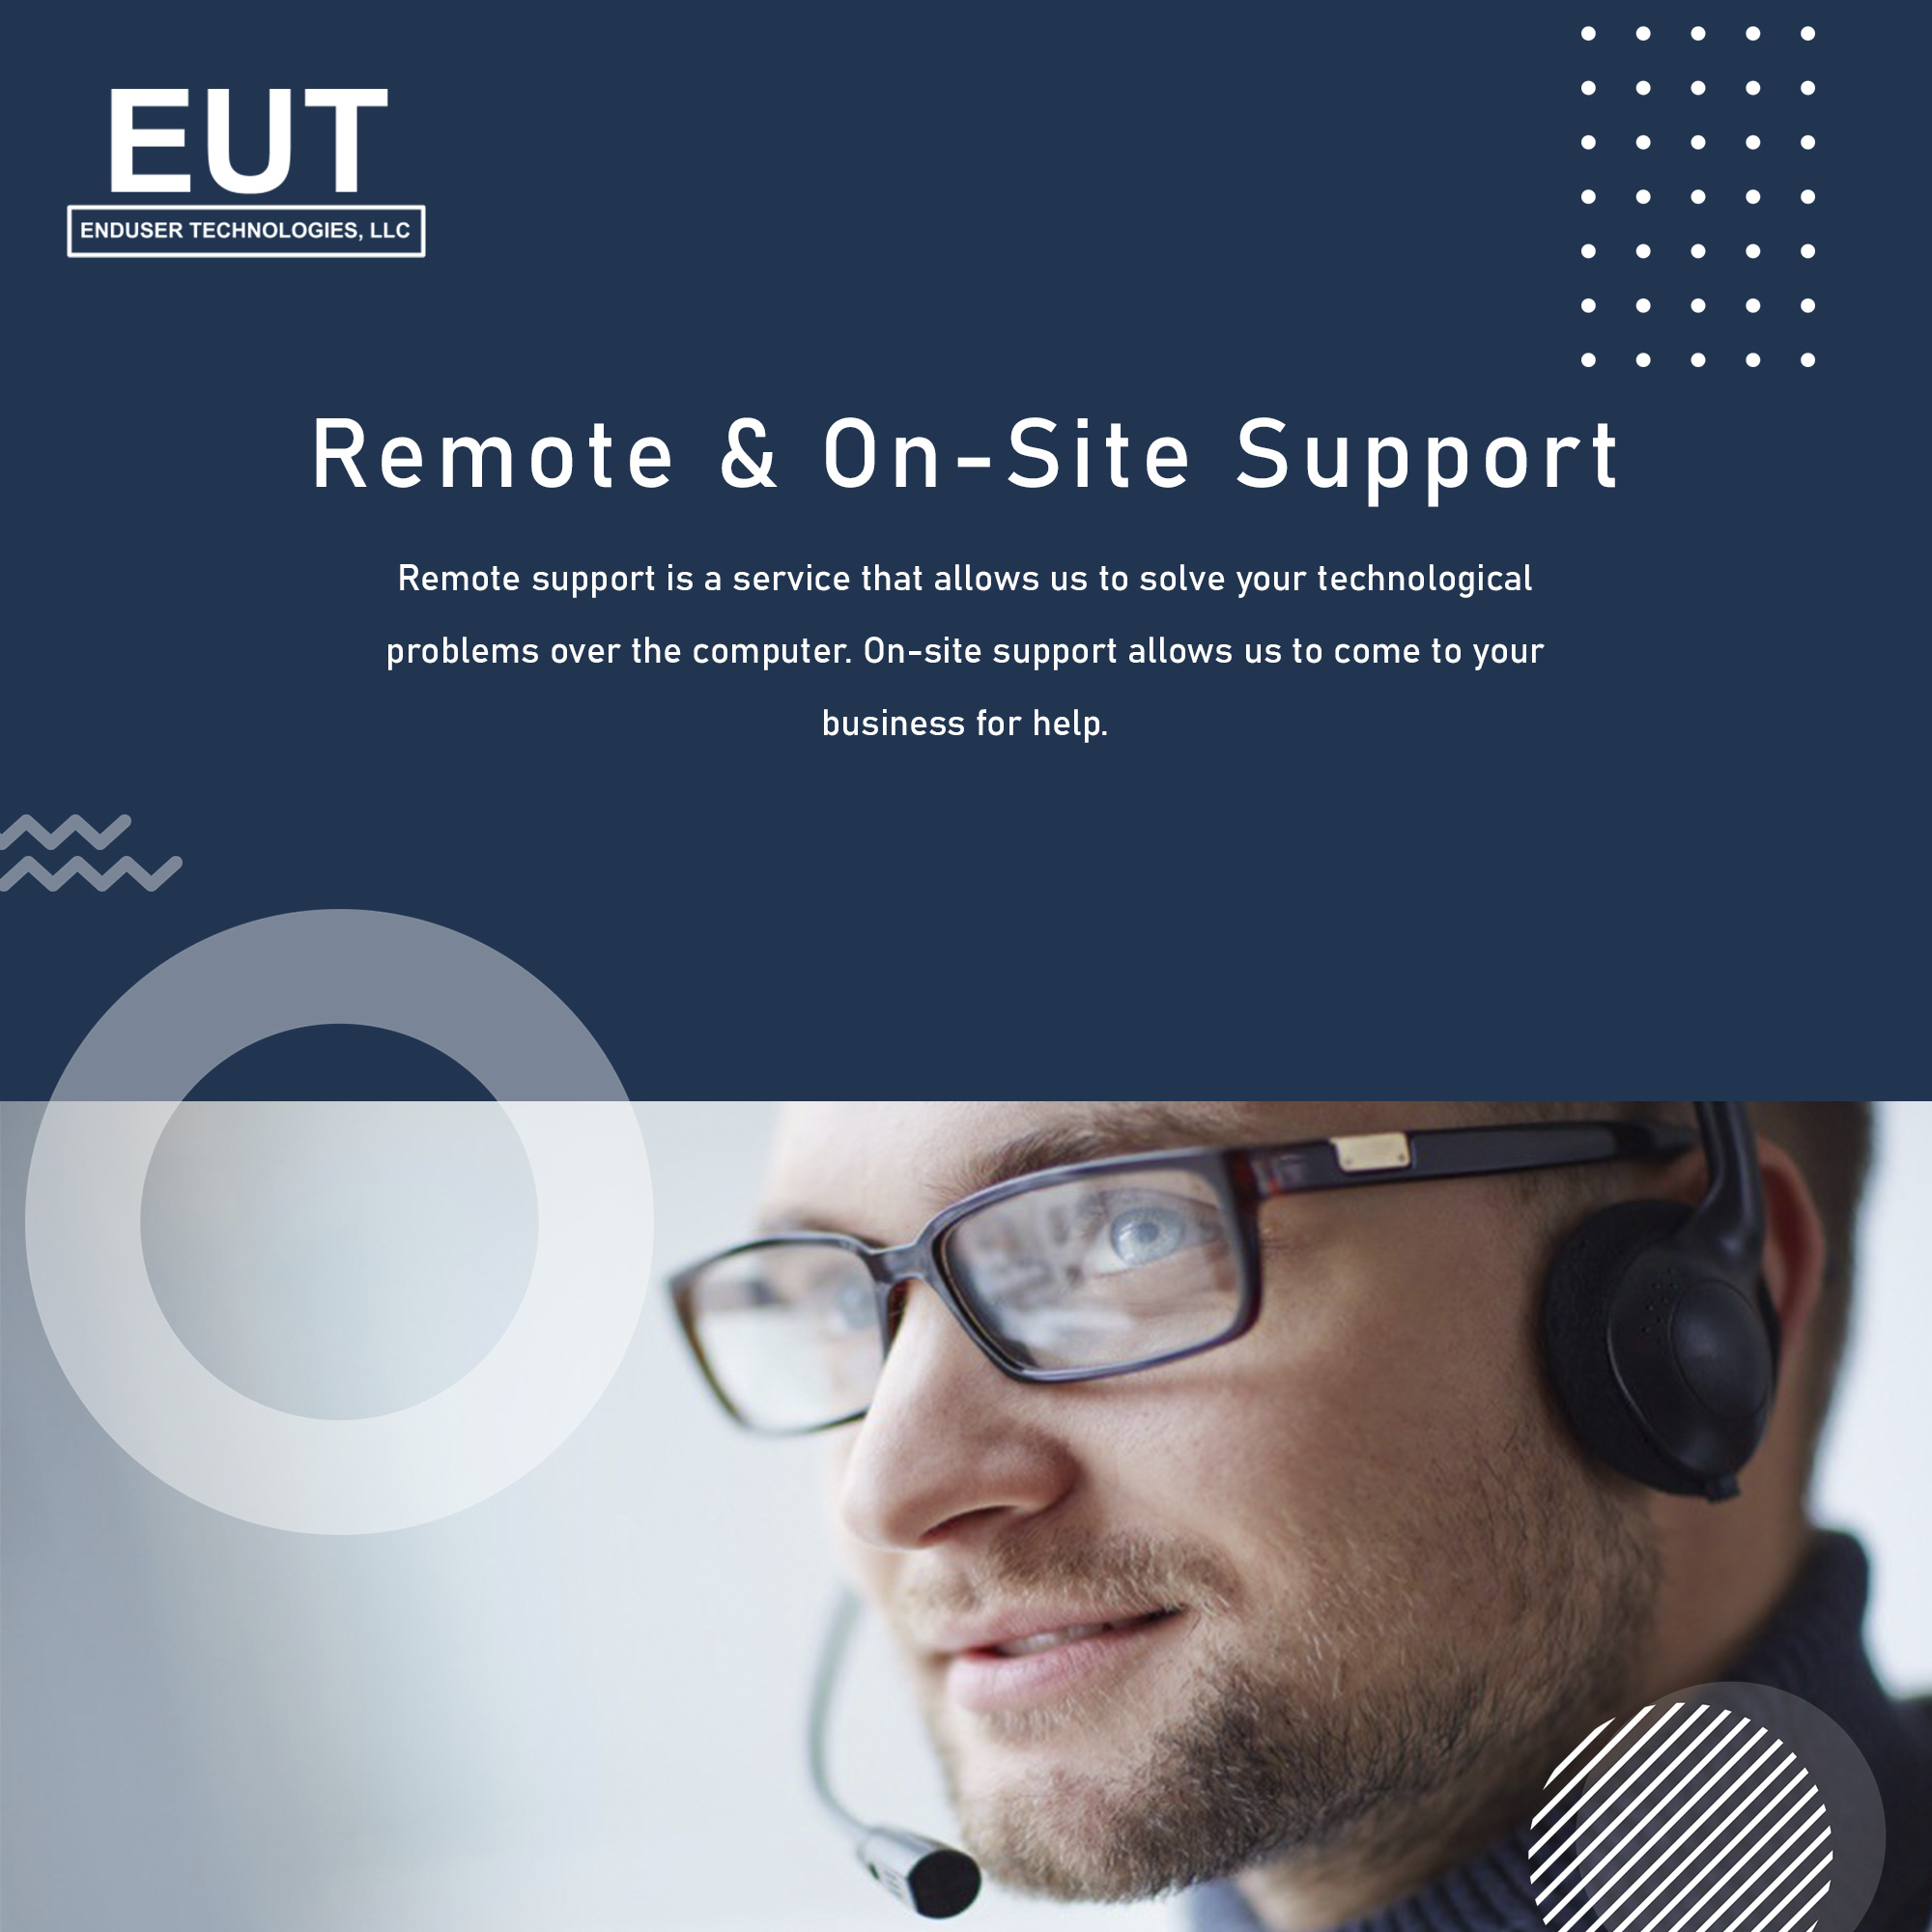 Remote & On-Site Support